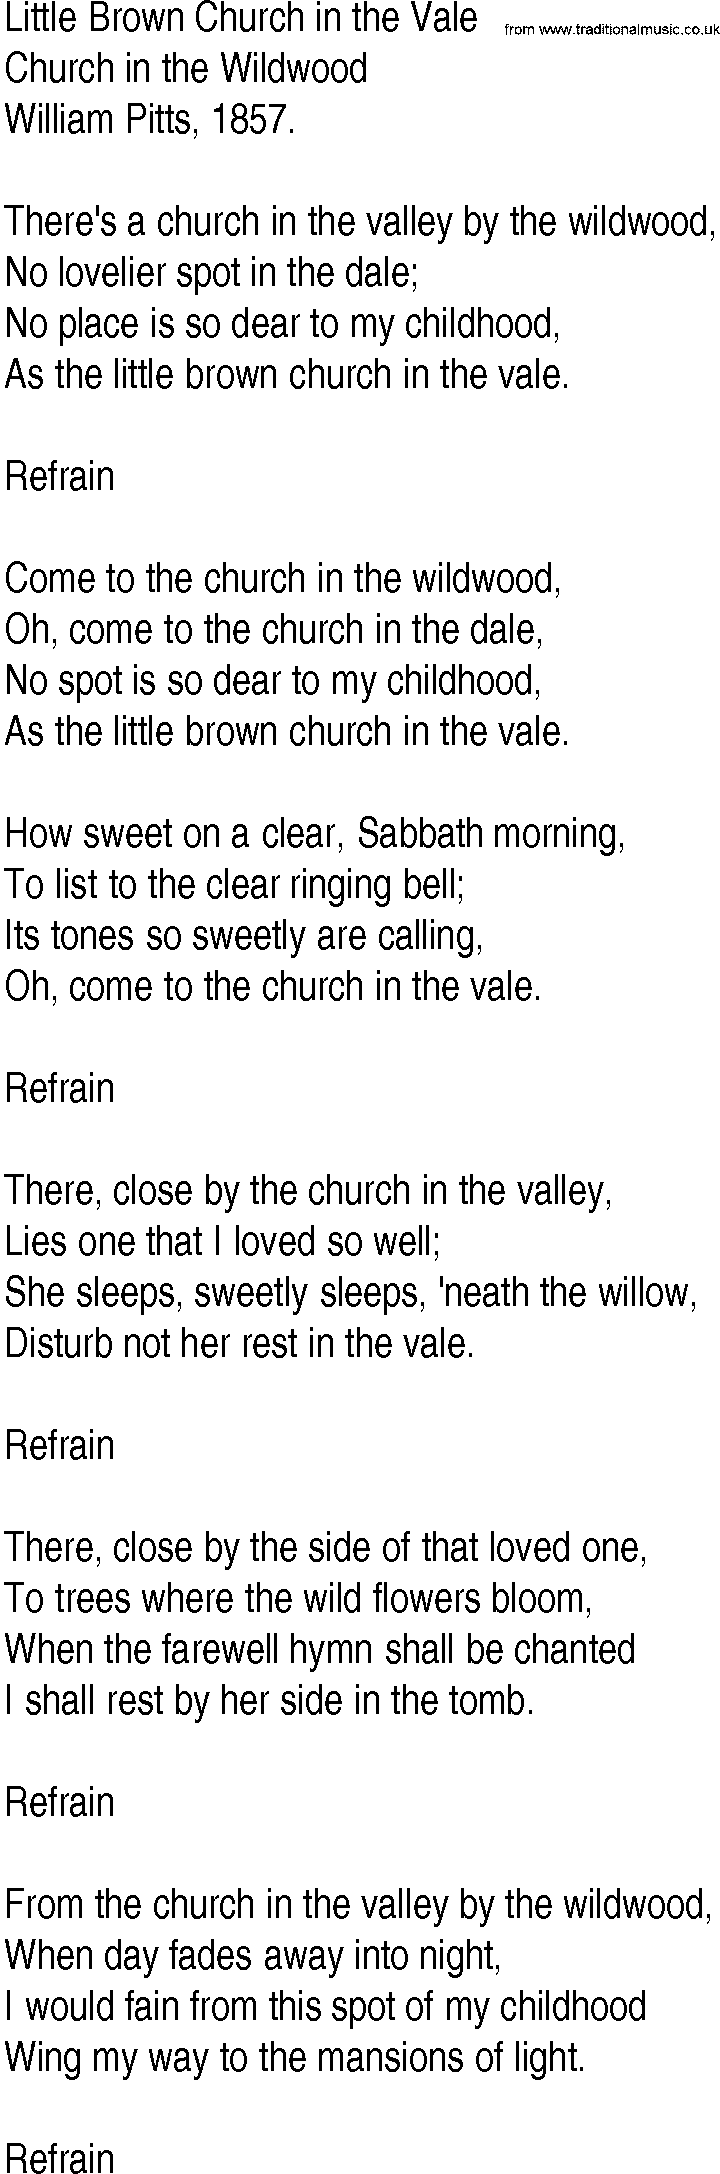 Hymn and Gospel Song: Little Brown Church in the Vale by William Pitts lyrics